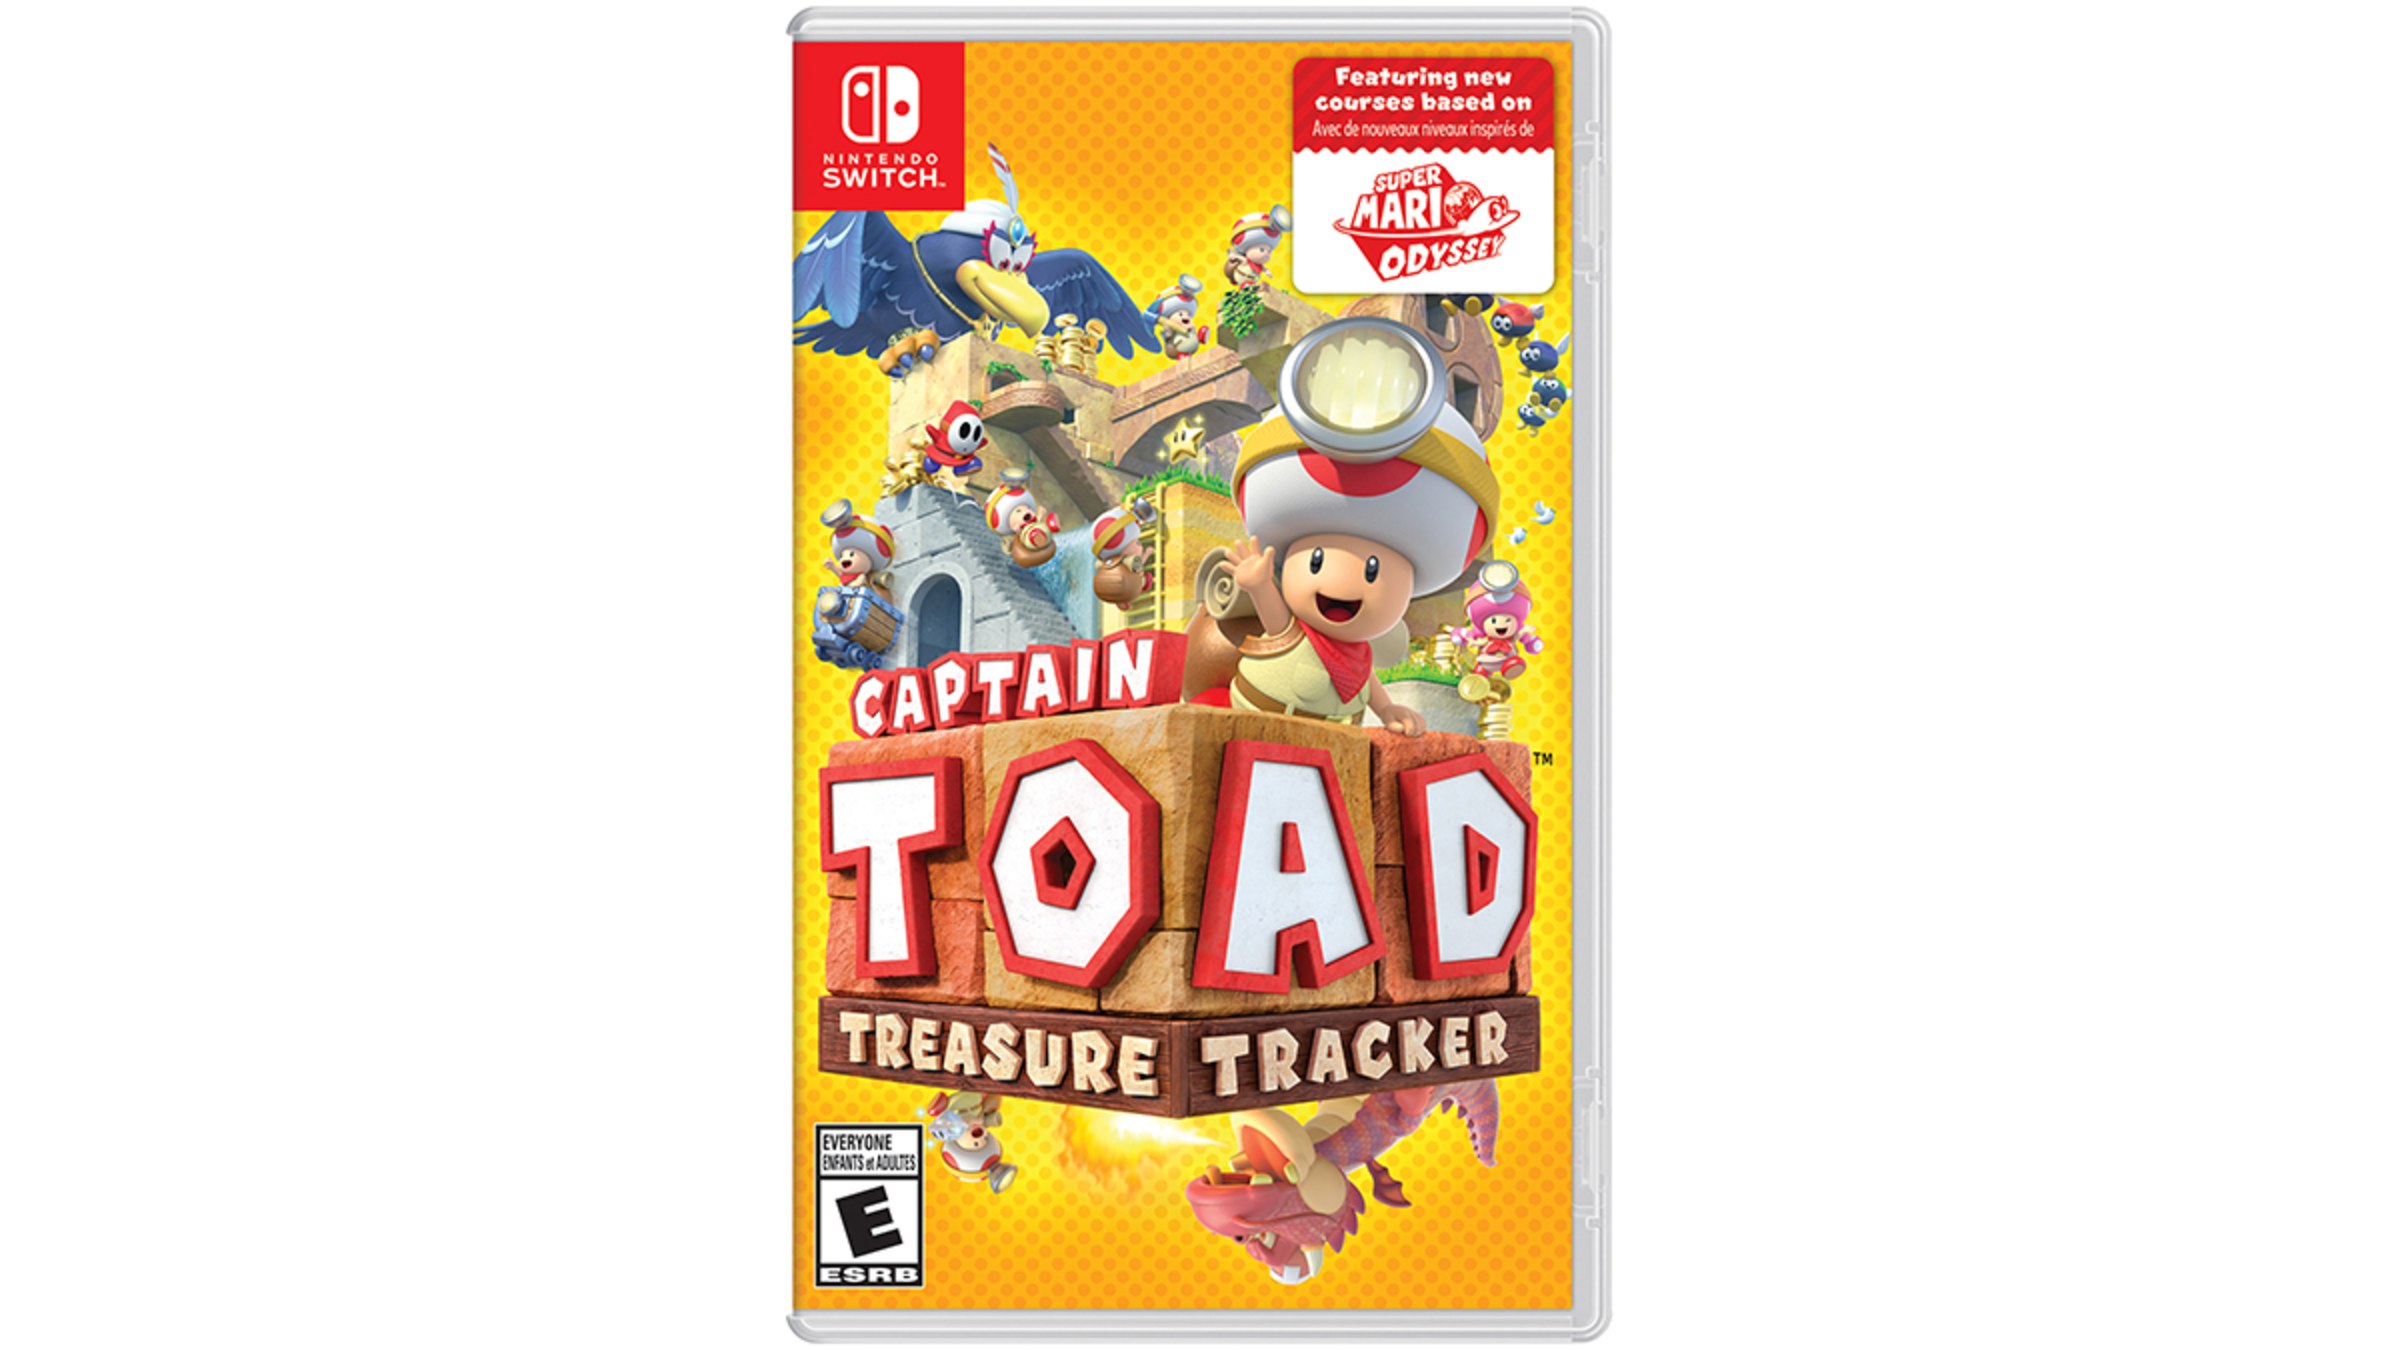 Captain Toad™: Tracker for Nintendo Switch - Nintendo Site